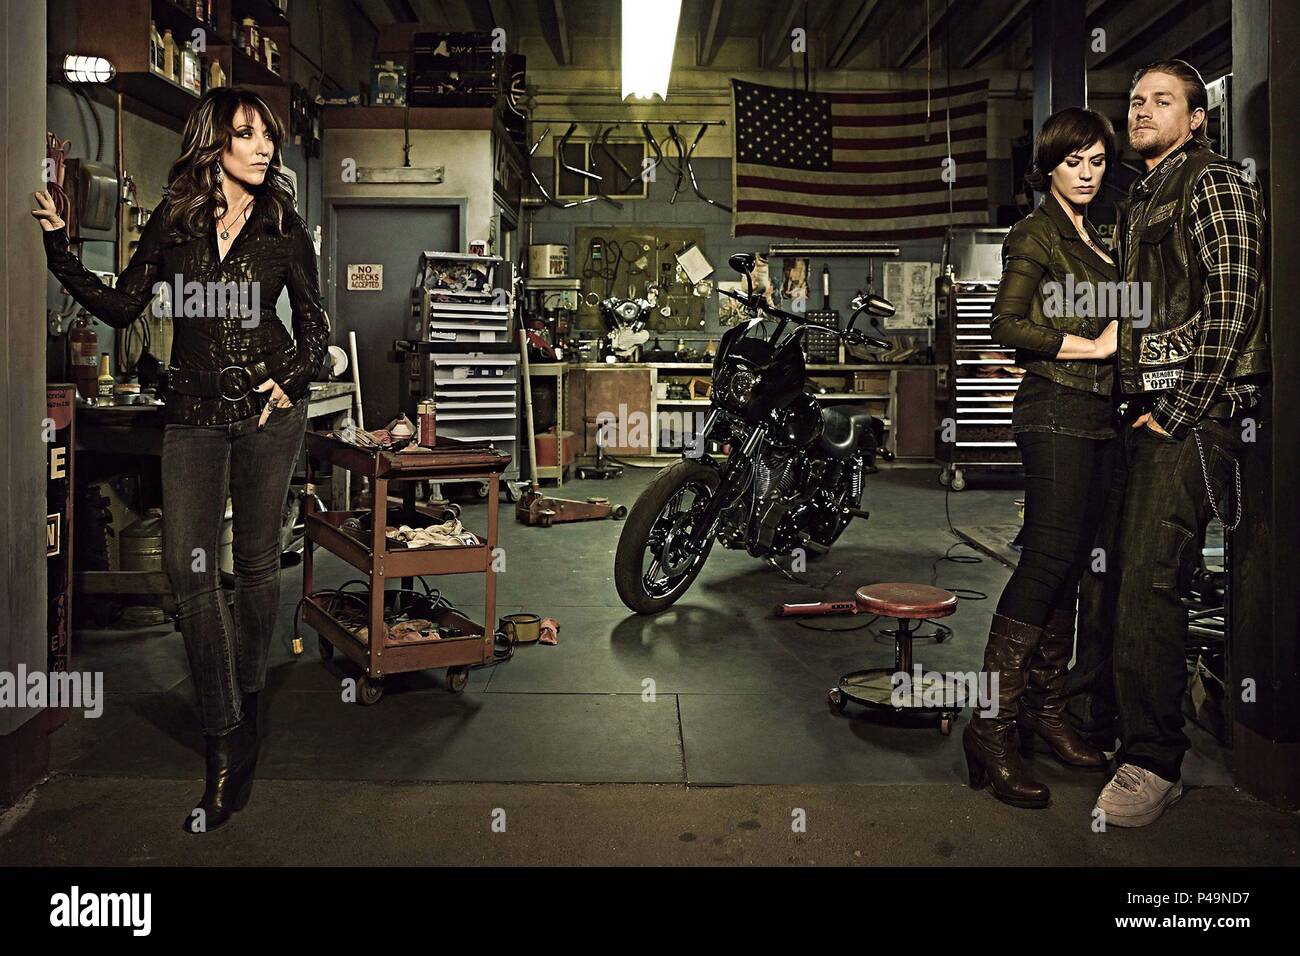 Original Film Title: SONS OF ANARCHY.  English Title: SONS OF ANARCHY.  Film Director: GUY FERLAND.  Year: 2008.  Stars: KATEY SAGAL; CHARLIE HUNNAM; MAGGIE SIFF. Credit: LINSON ENTERTAINMENT / Album Stock Photo